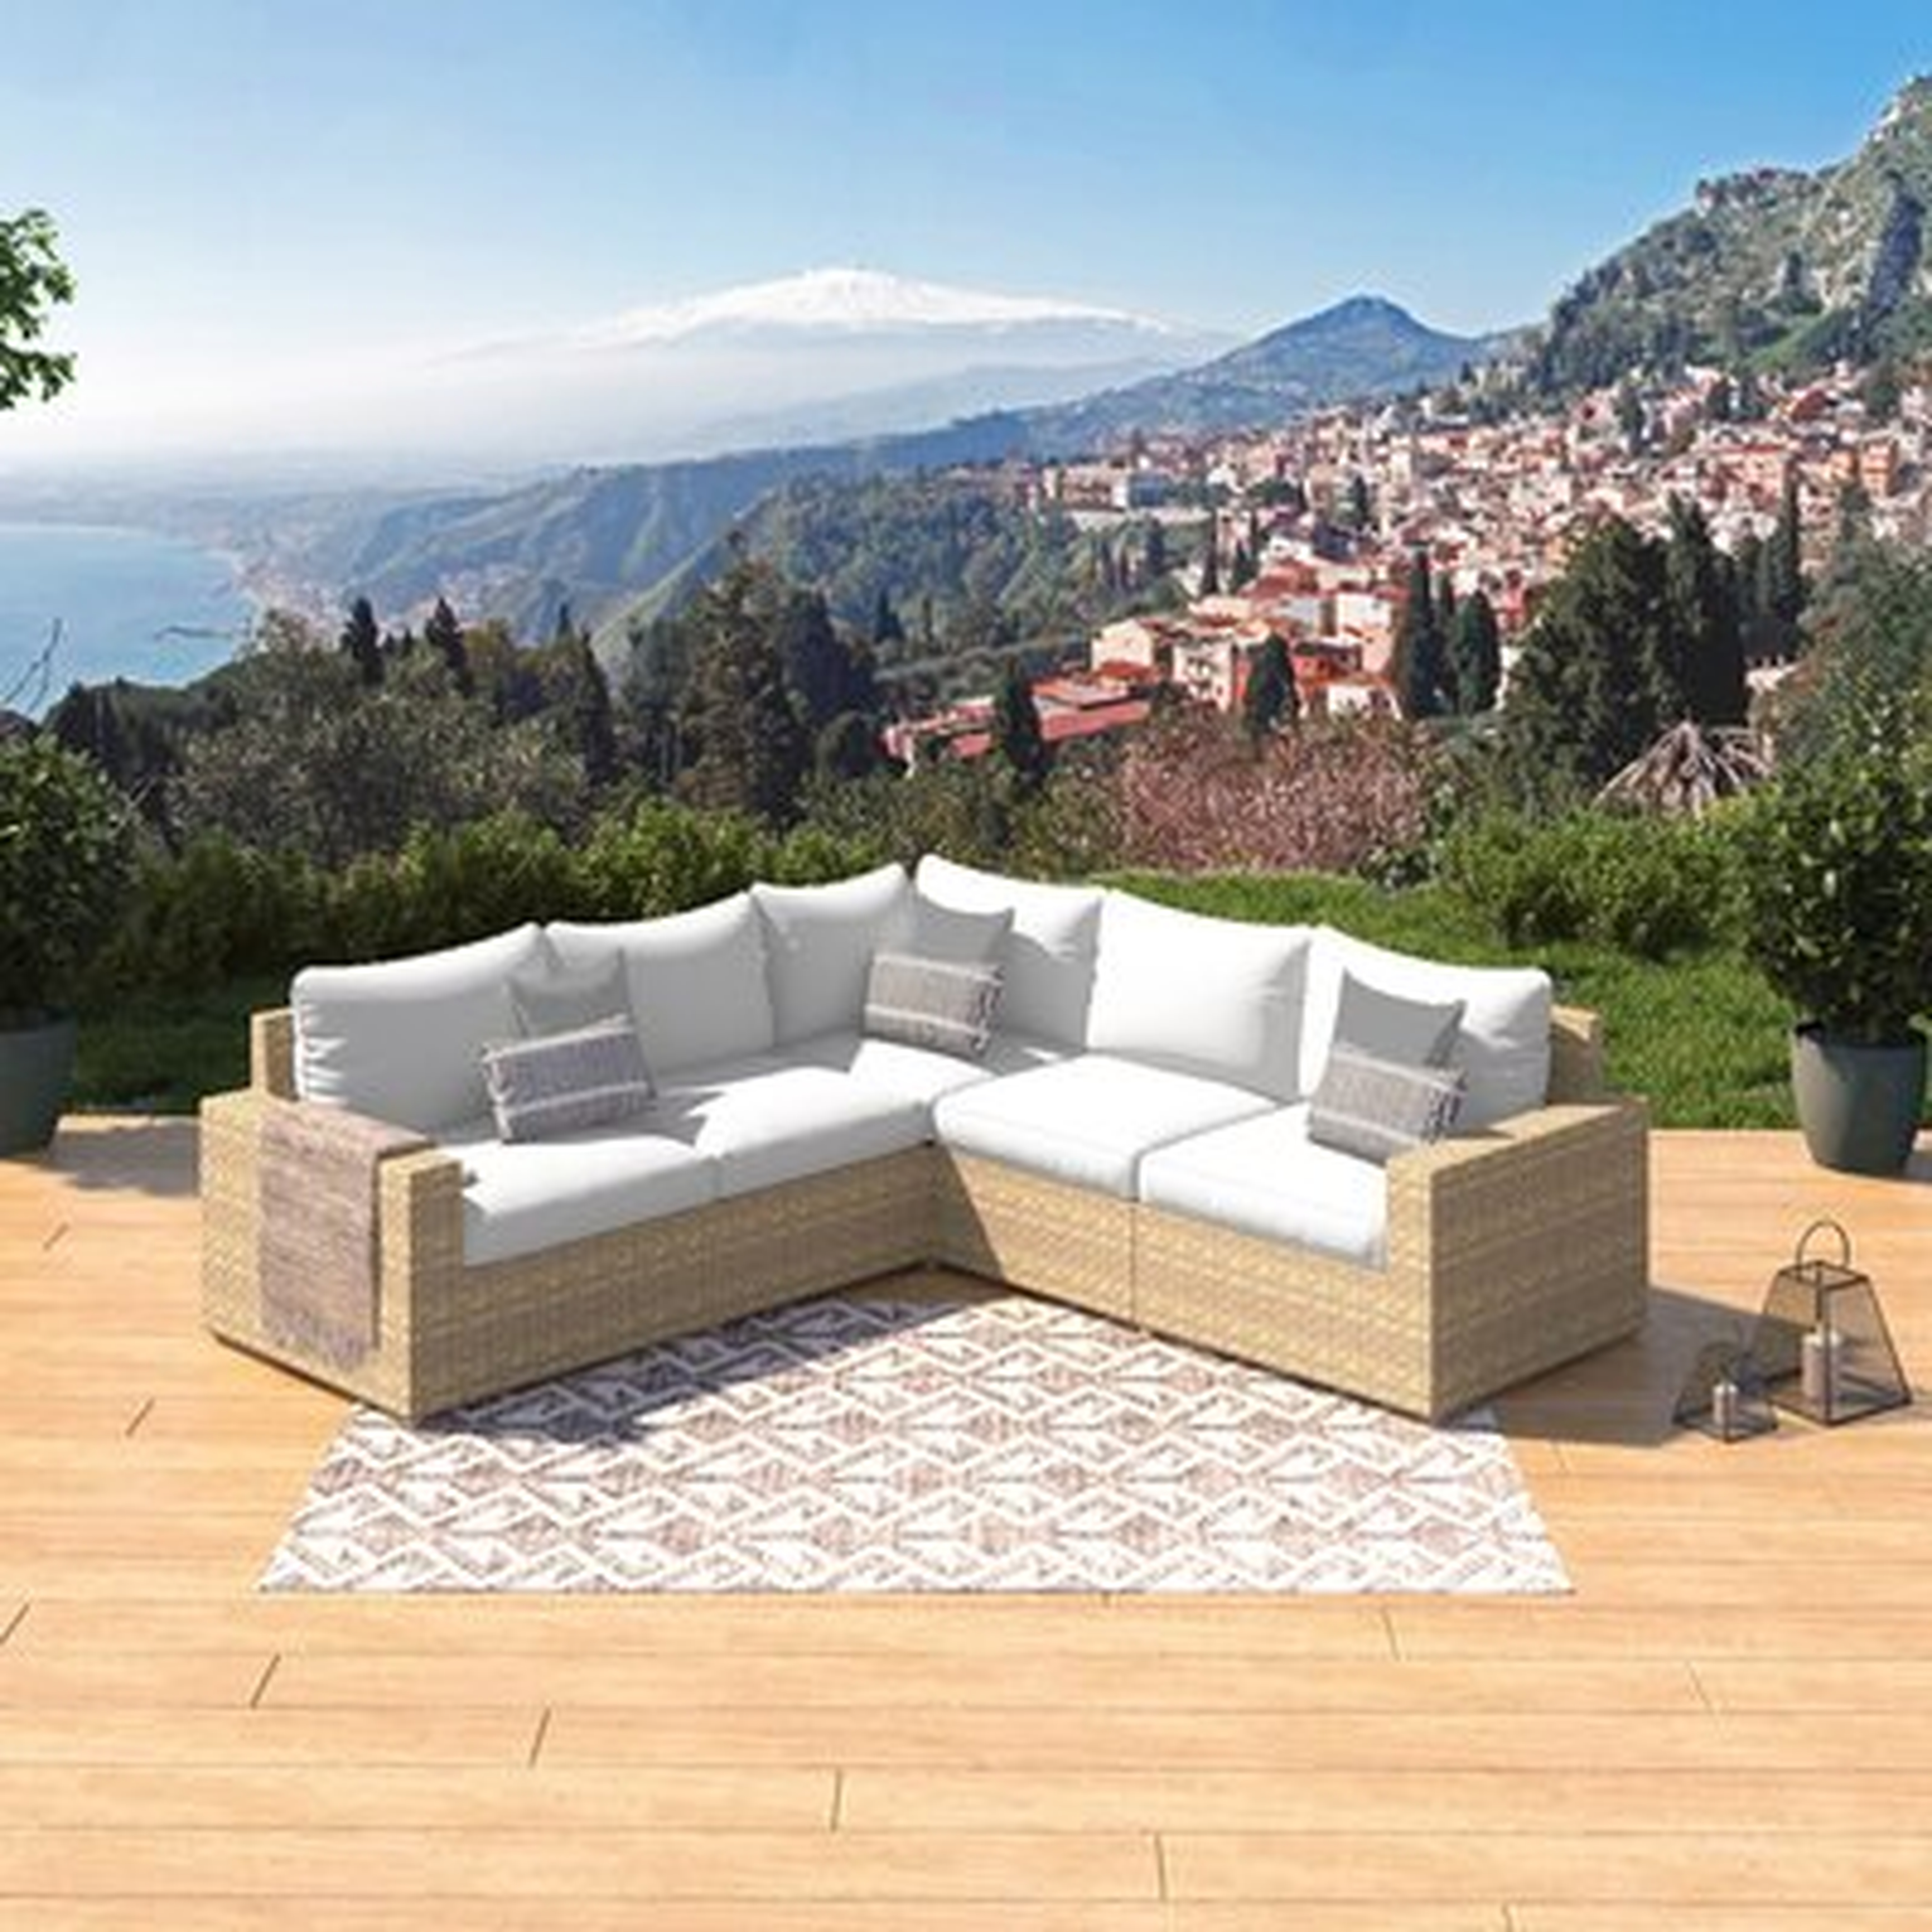 Imia 5 Piece Sectional Seating Group with Cushions - Wayfair